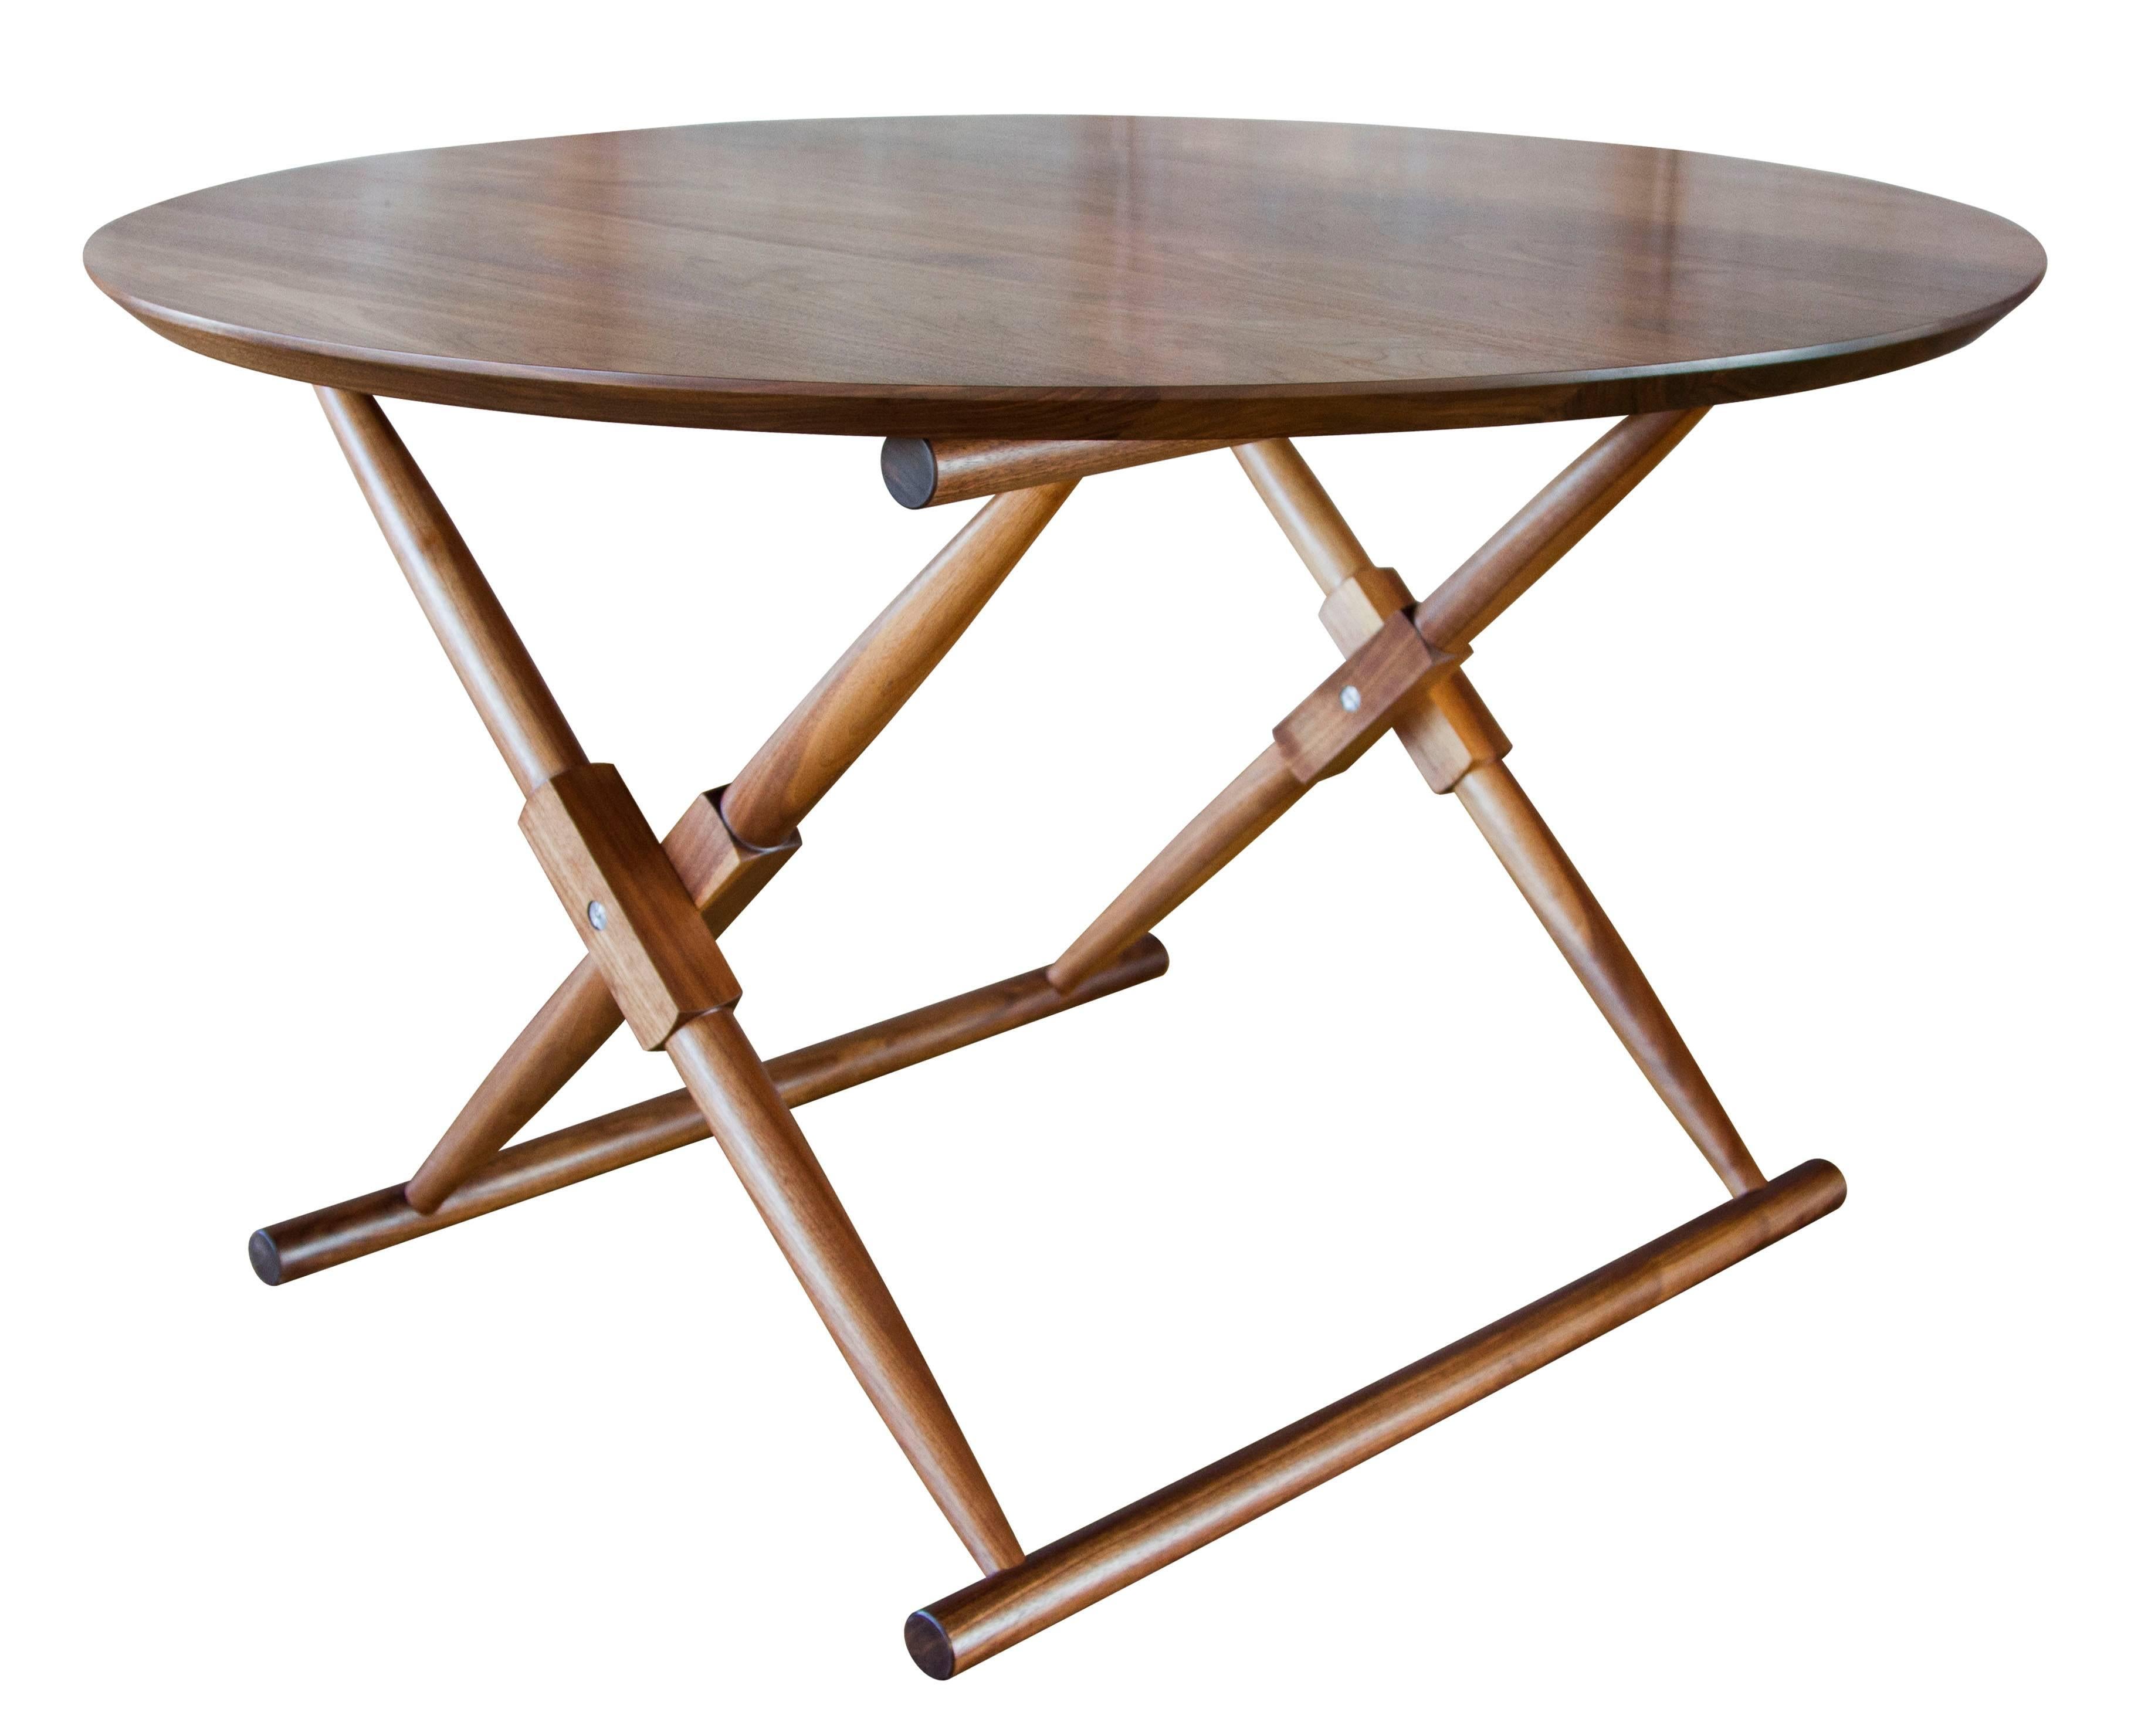 The Matthiessen round dining table in oiled walnut 

The modern campaign collection by Richard Wrightman combines the vernacular of traditional form with a modern aesthetic, mixing memory with invention, creating pieces that subtly reference the